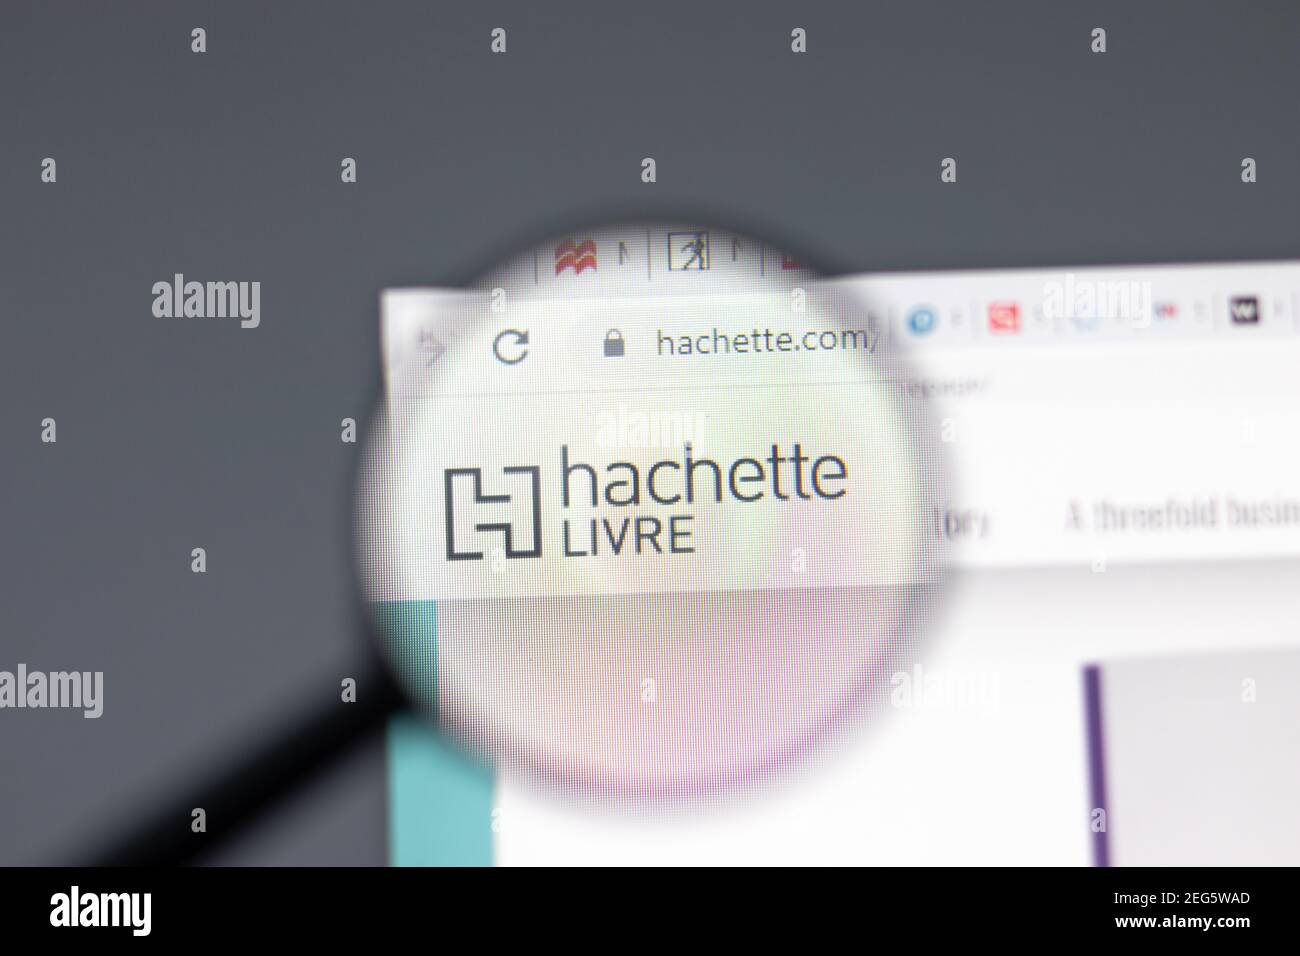 New York, USA - 15 February 2021: Hachette Livre website in browser with company logo, Illustrative Editorial Stock Photo